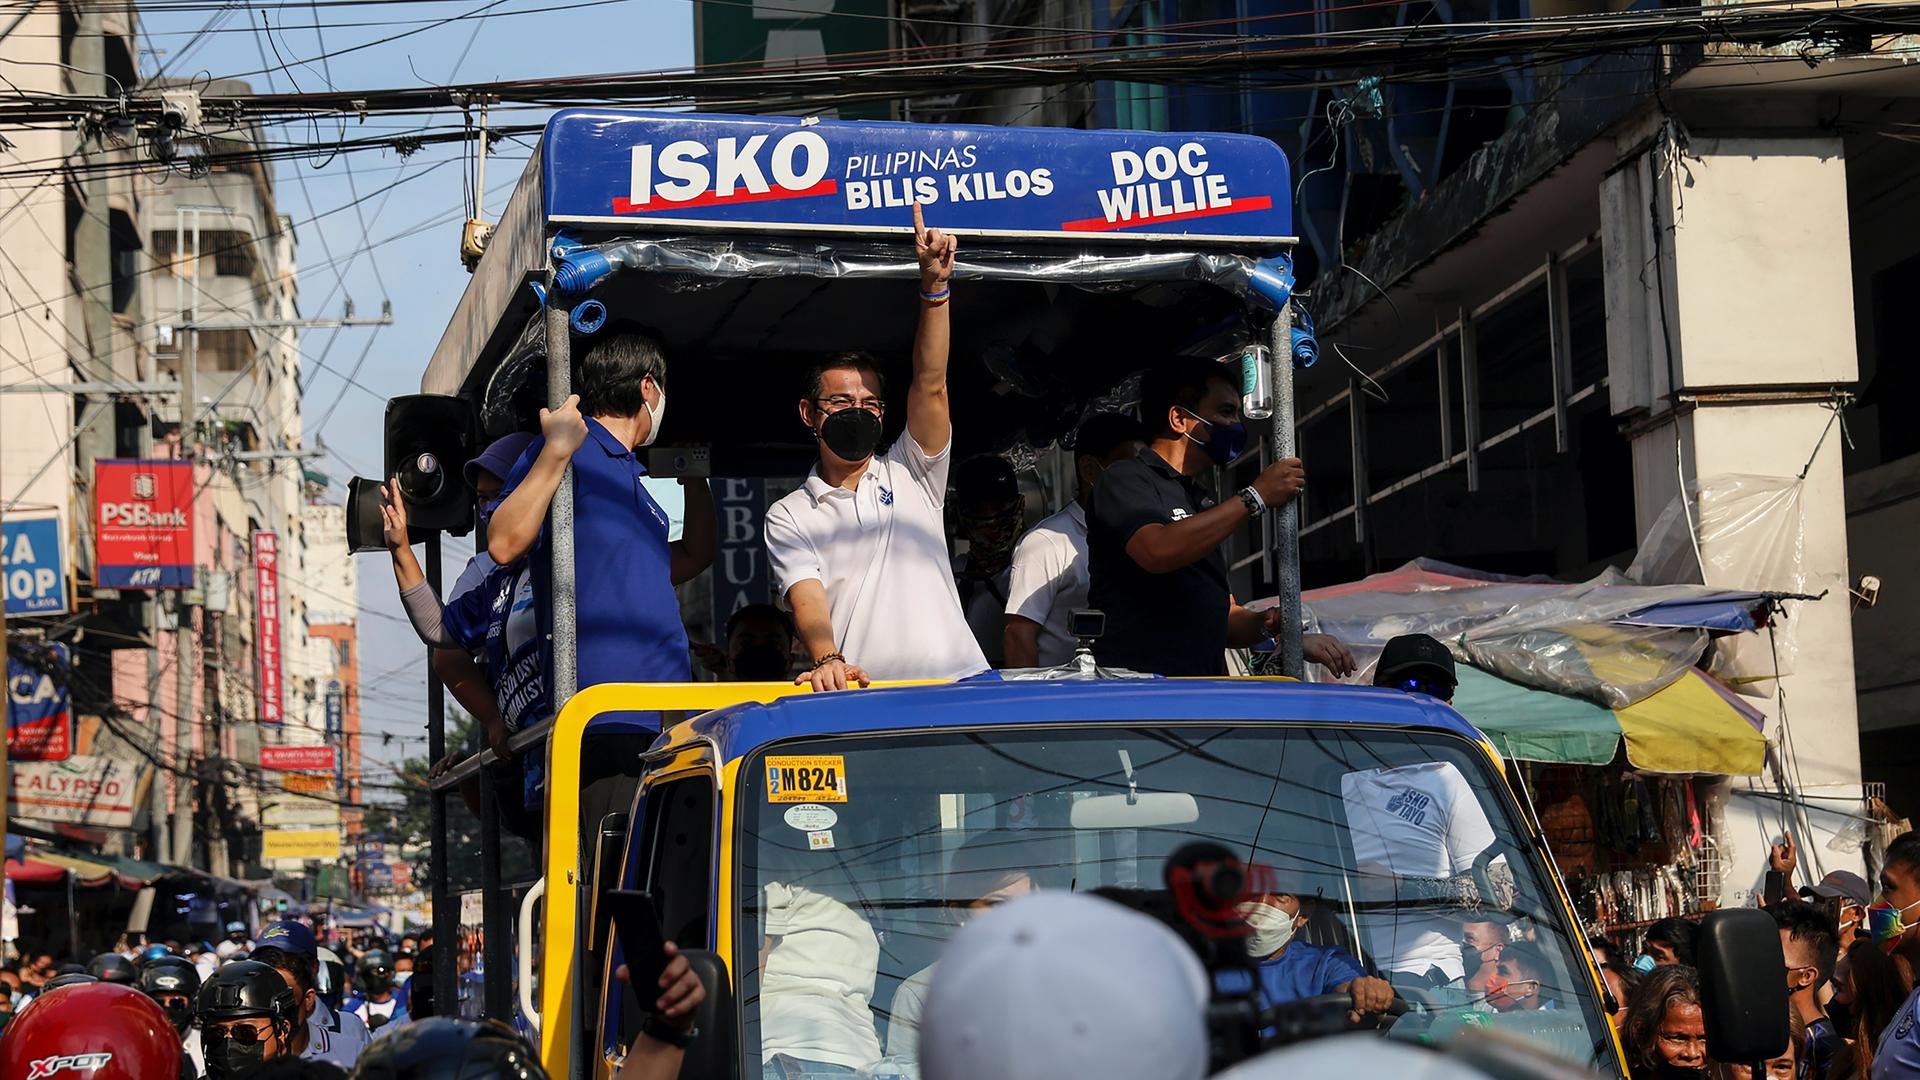 Manila Mayor Isko Moreno, center, gestures as he greets his supporters during a motorcade promoting his presidential bid in the 2022 national elections in Manila, Philippines, Feb. 8, 2022. 